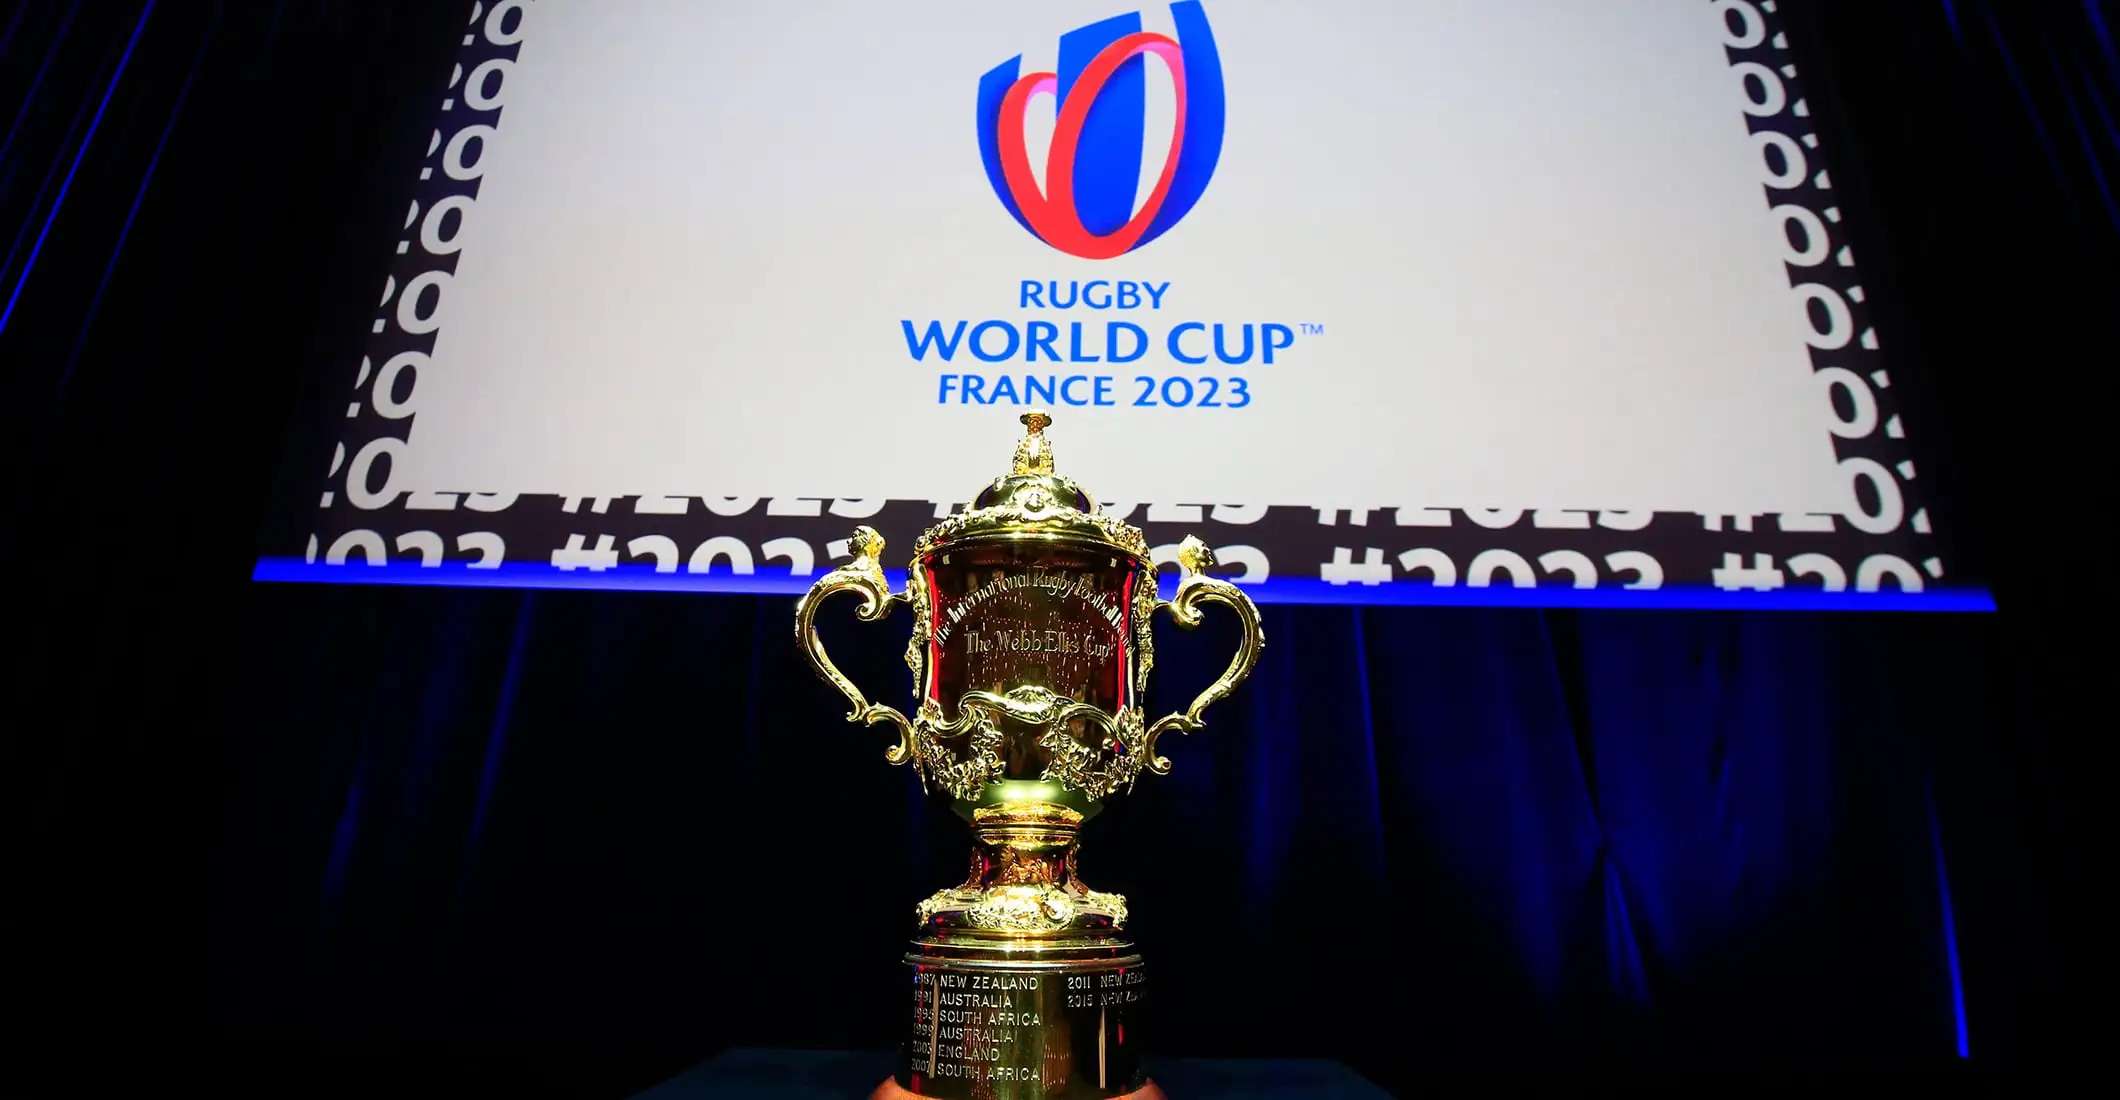 Book a hotel for the 2023 Rugby World Cup